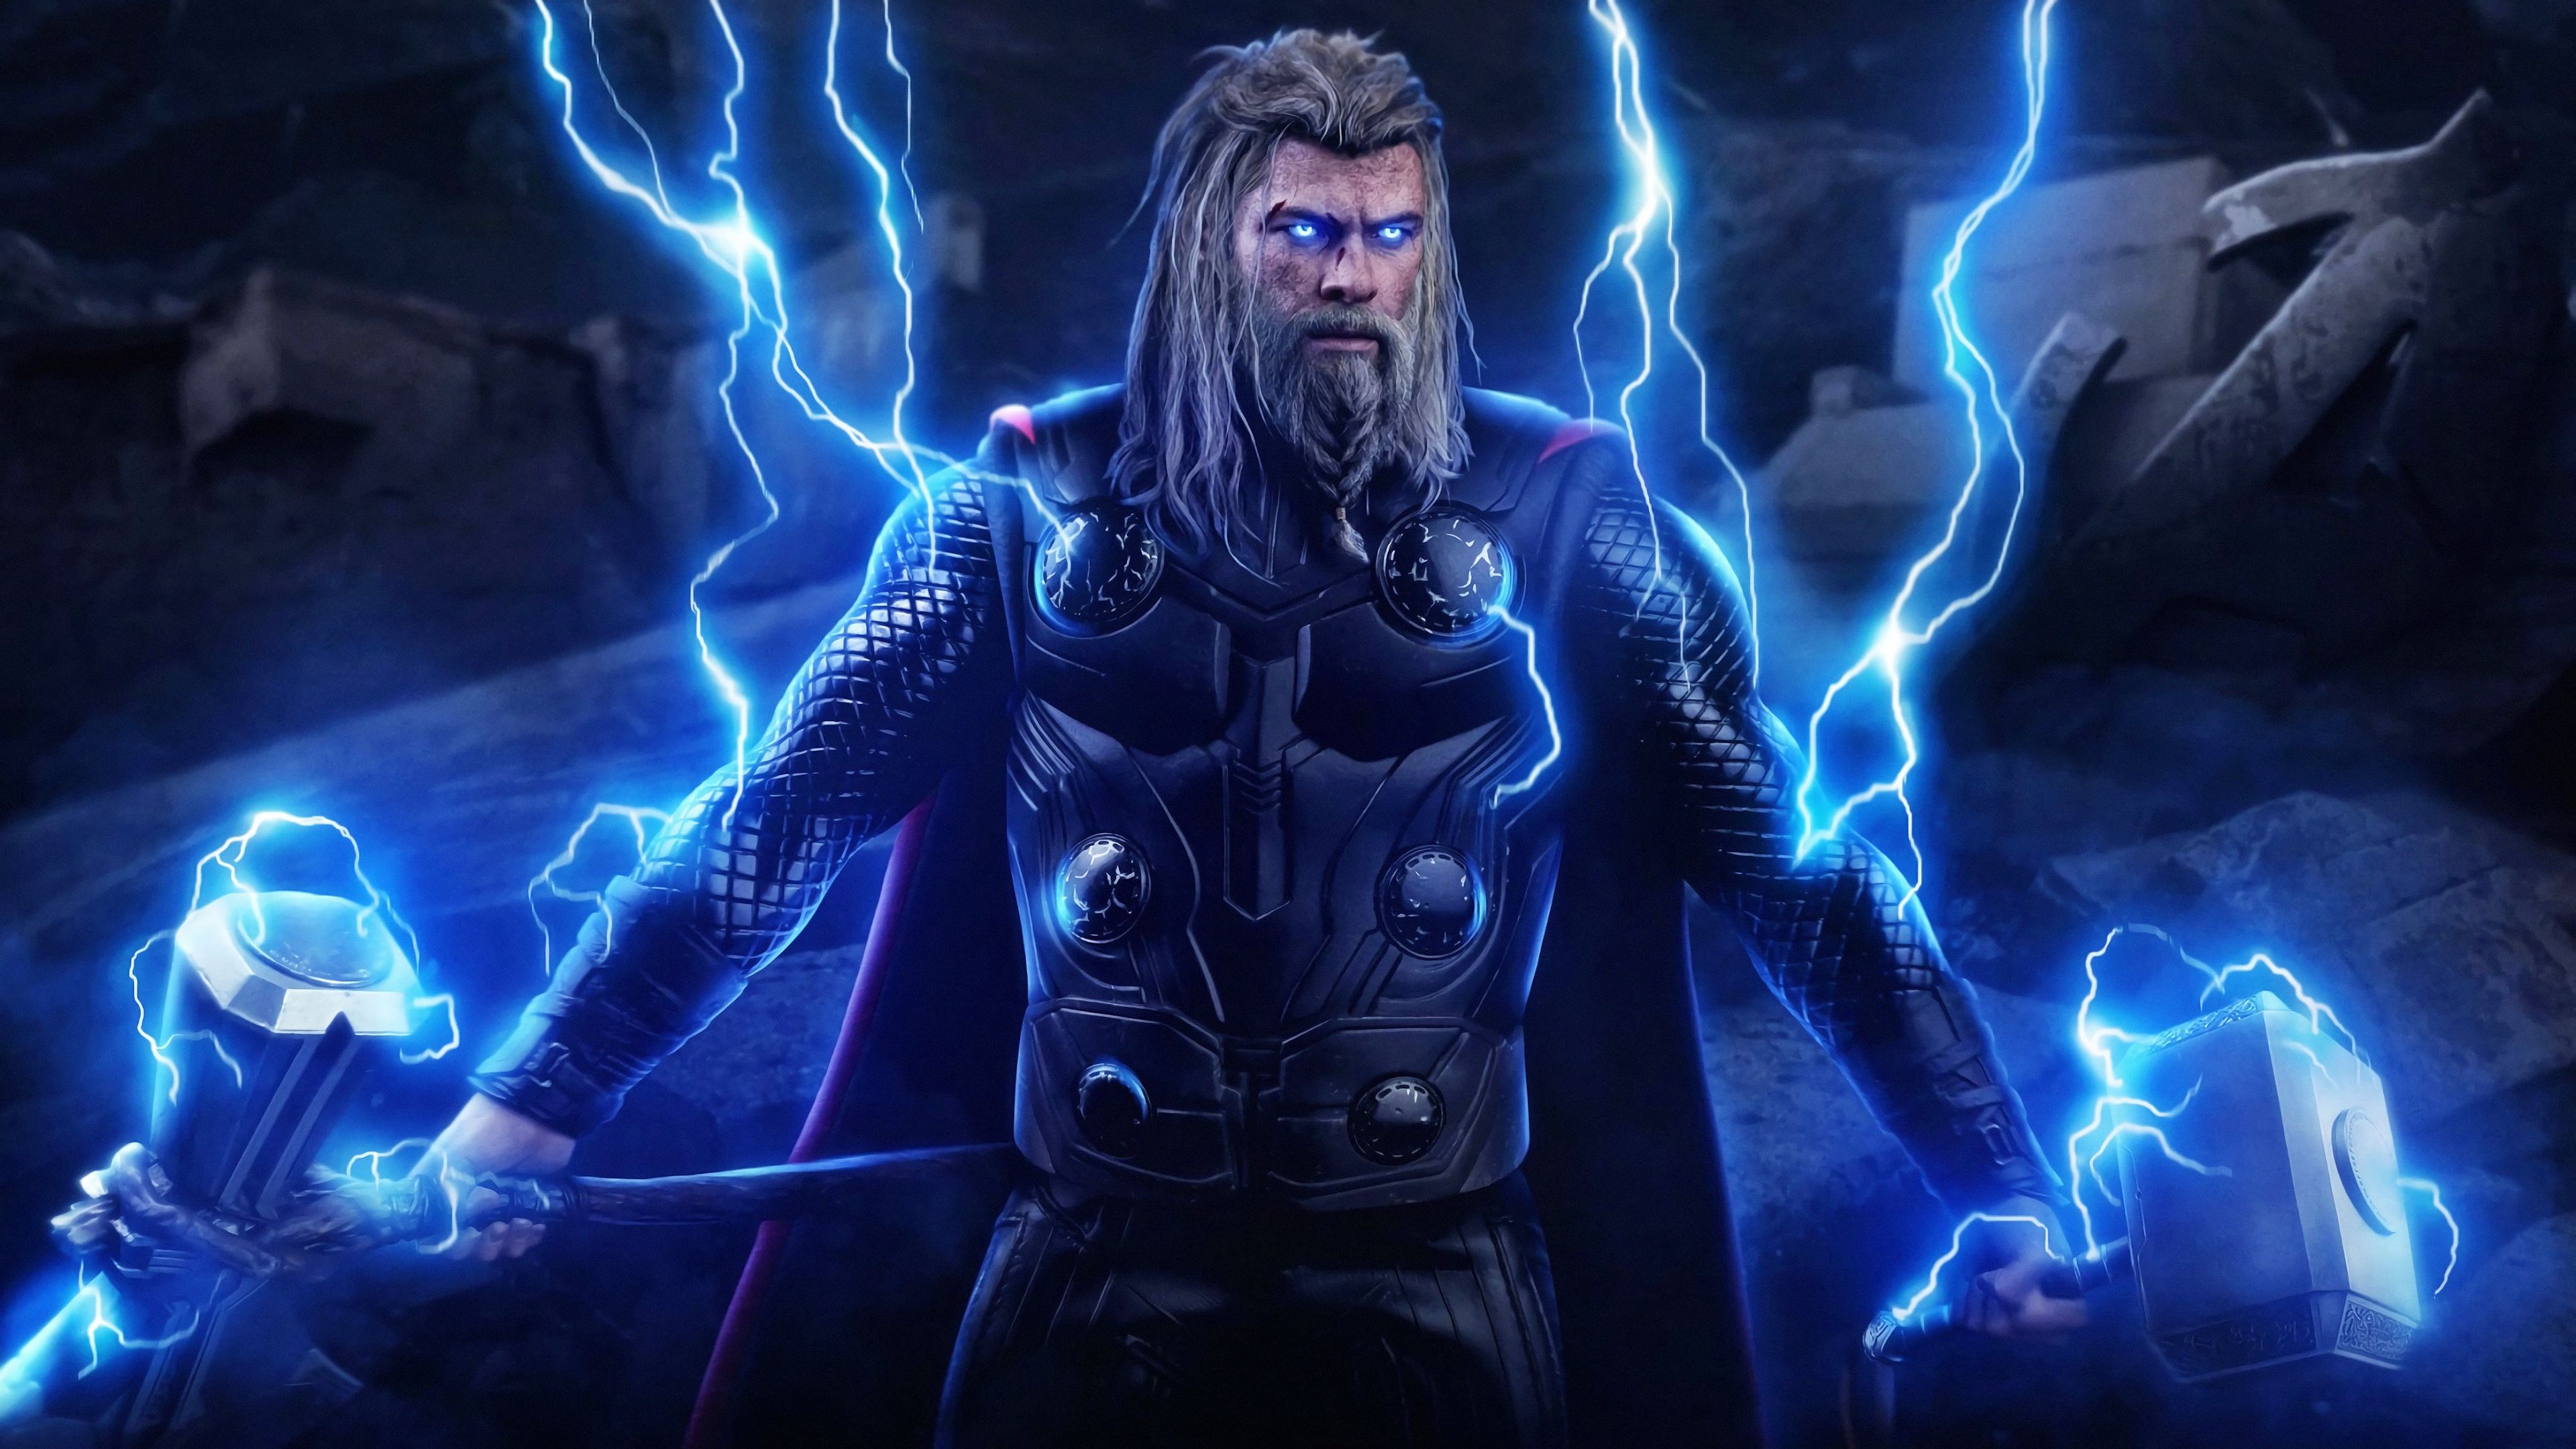 Thor With Stormbreaker 4k Wallpapers - Wallpaper Cave.